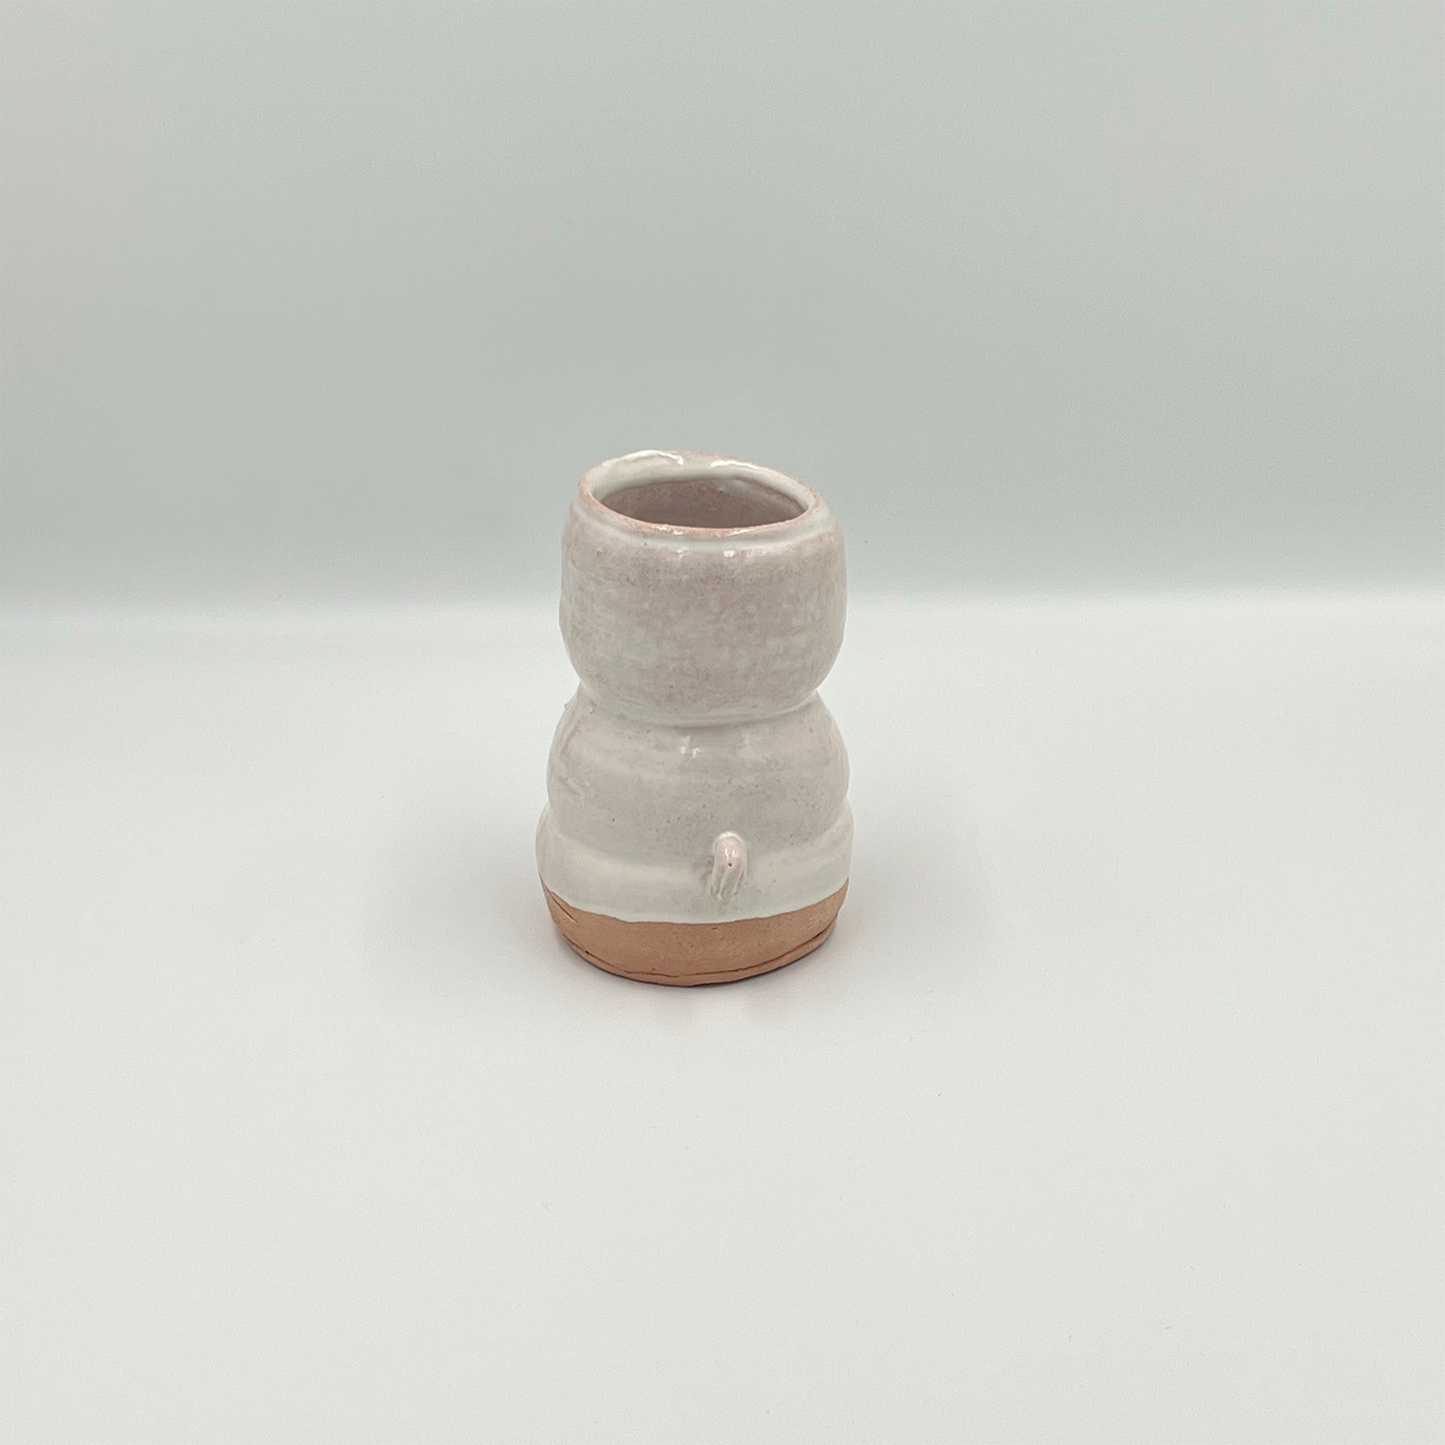 Two-ears small vase